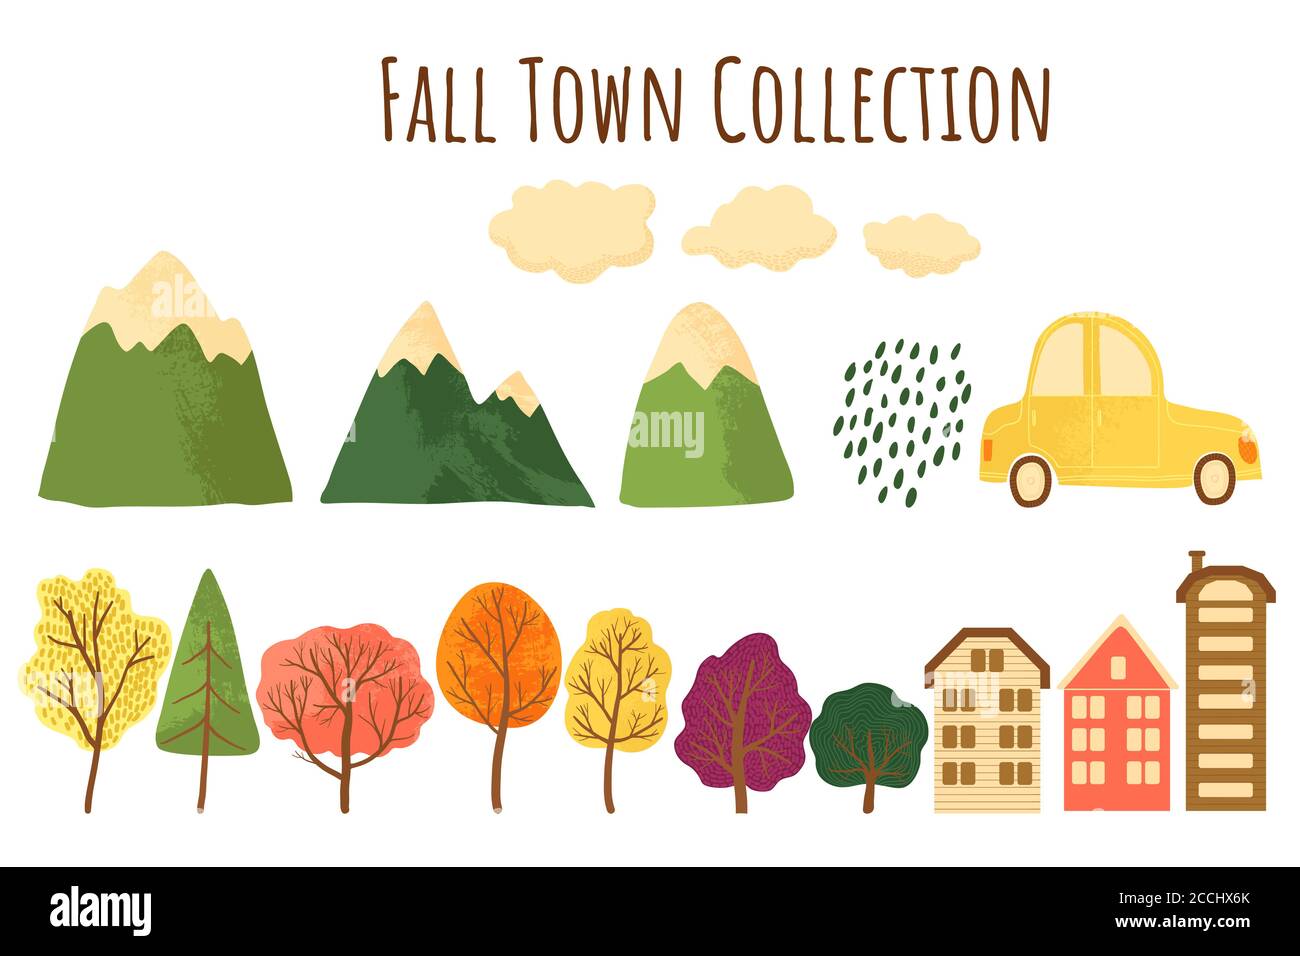 Autumn collection with trees, mountains, houses, car and clouds icons. Constructor set for colorful falls landscape concept in cartoons flat style. Ve Stock Vector